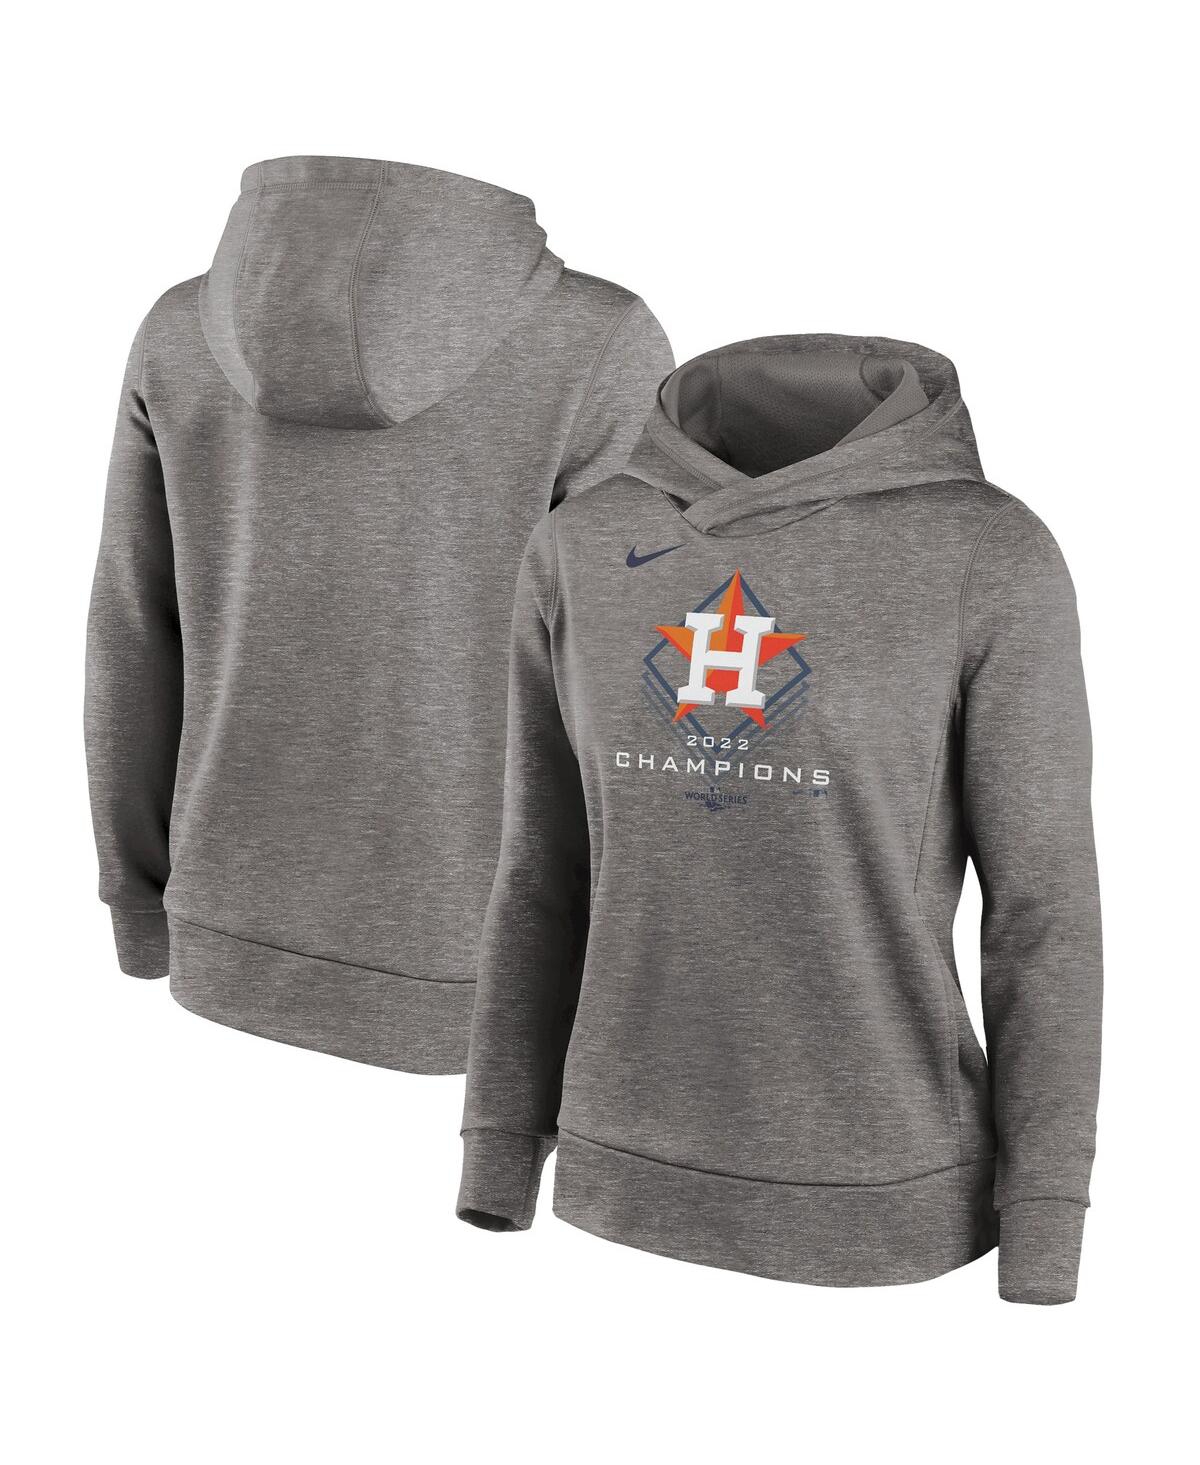 Women's Nike Heather Charcoal Houston Astros 2022 World Series Champions Prize Pullover Hoodie